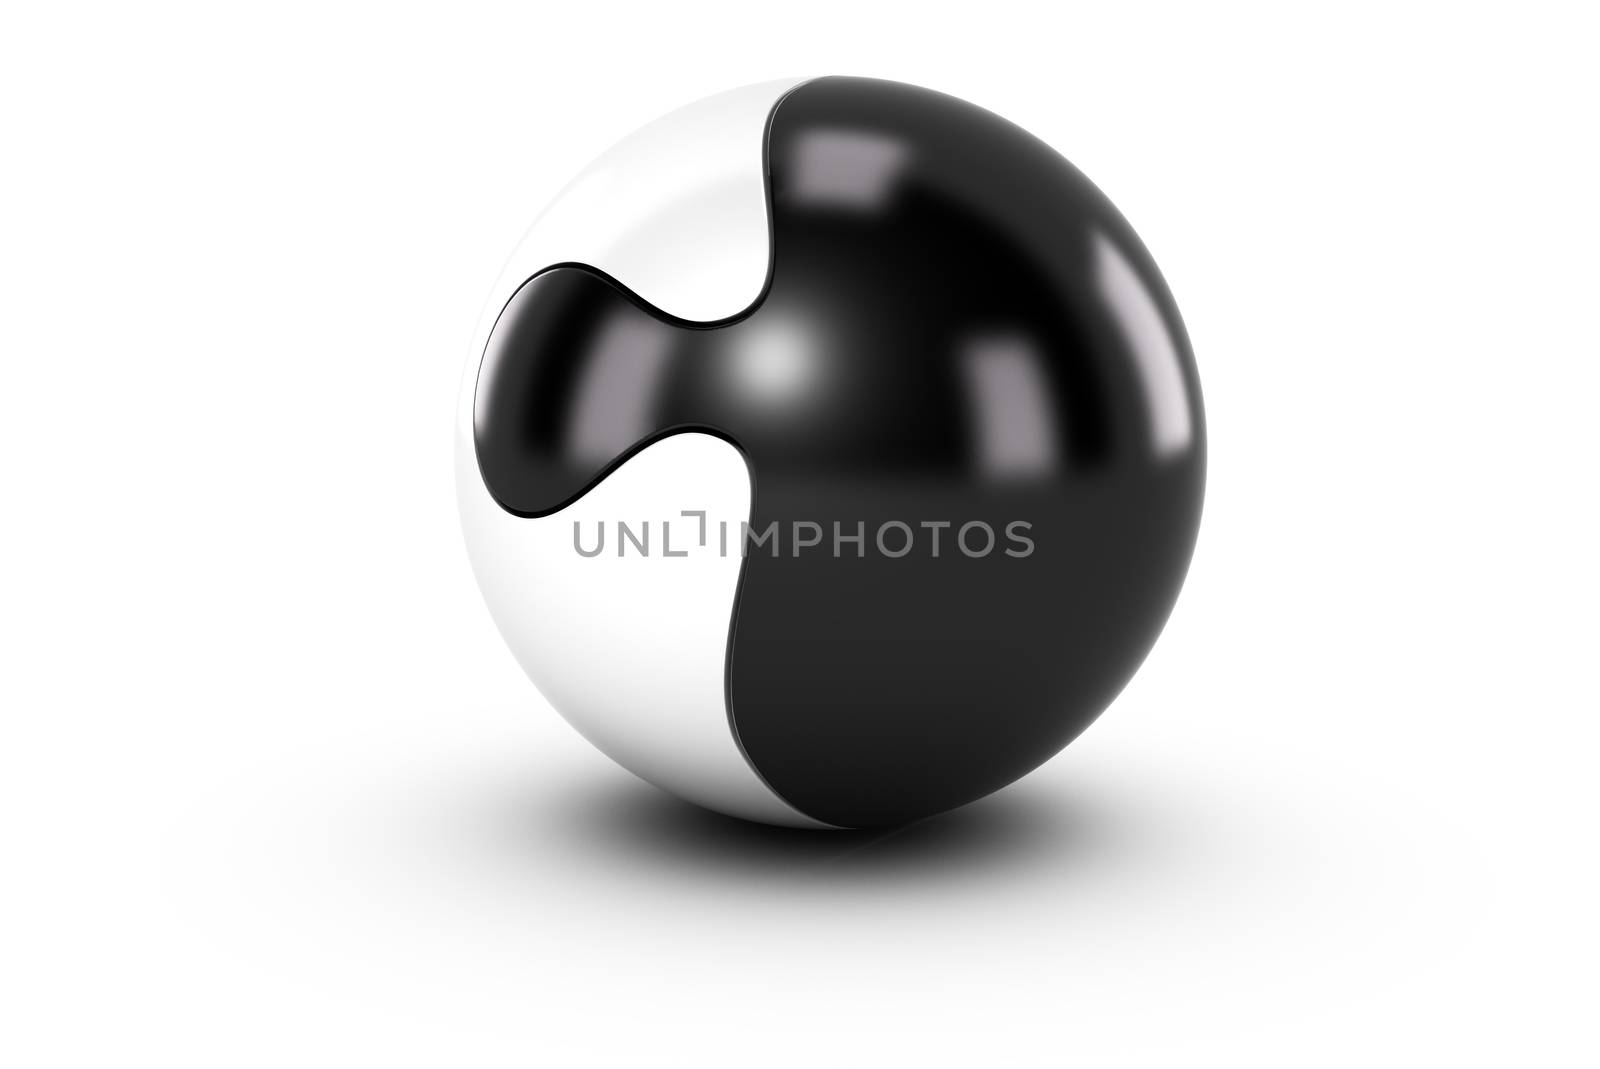 Splited sphere or spherical jigsaw puzzle with two colors black and white symbol of partnership or collaborative work or strategic alliance.